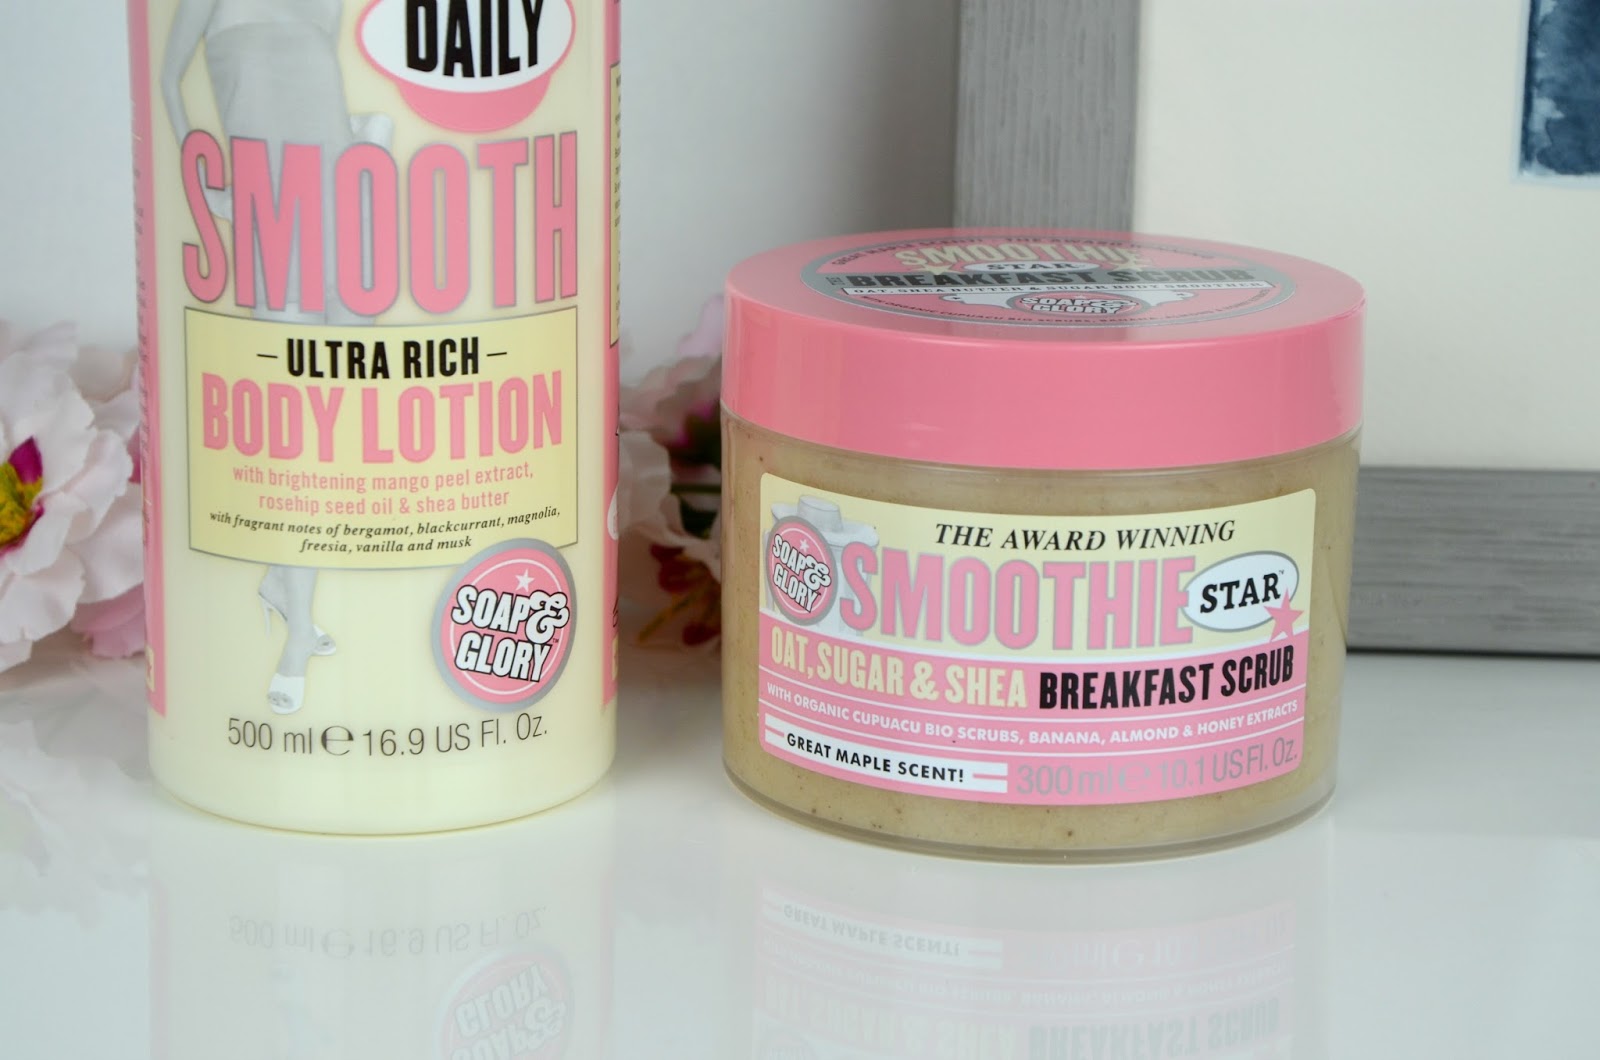 the daily smooth ultra rich body lotion smoothie and smoothie star breakfast scrub soap and glory